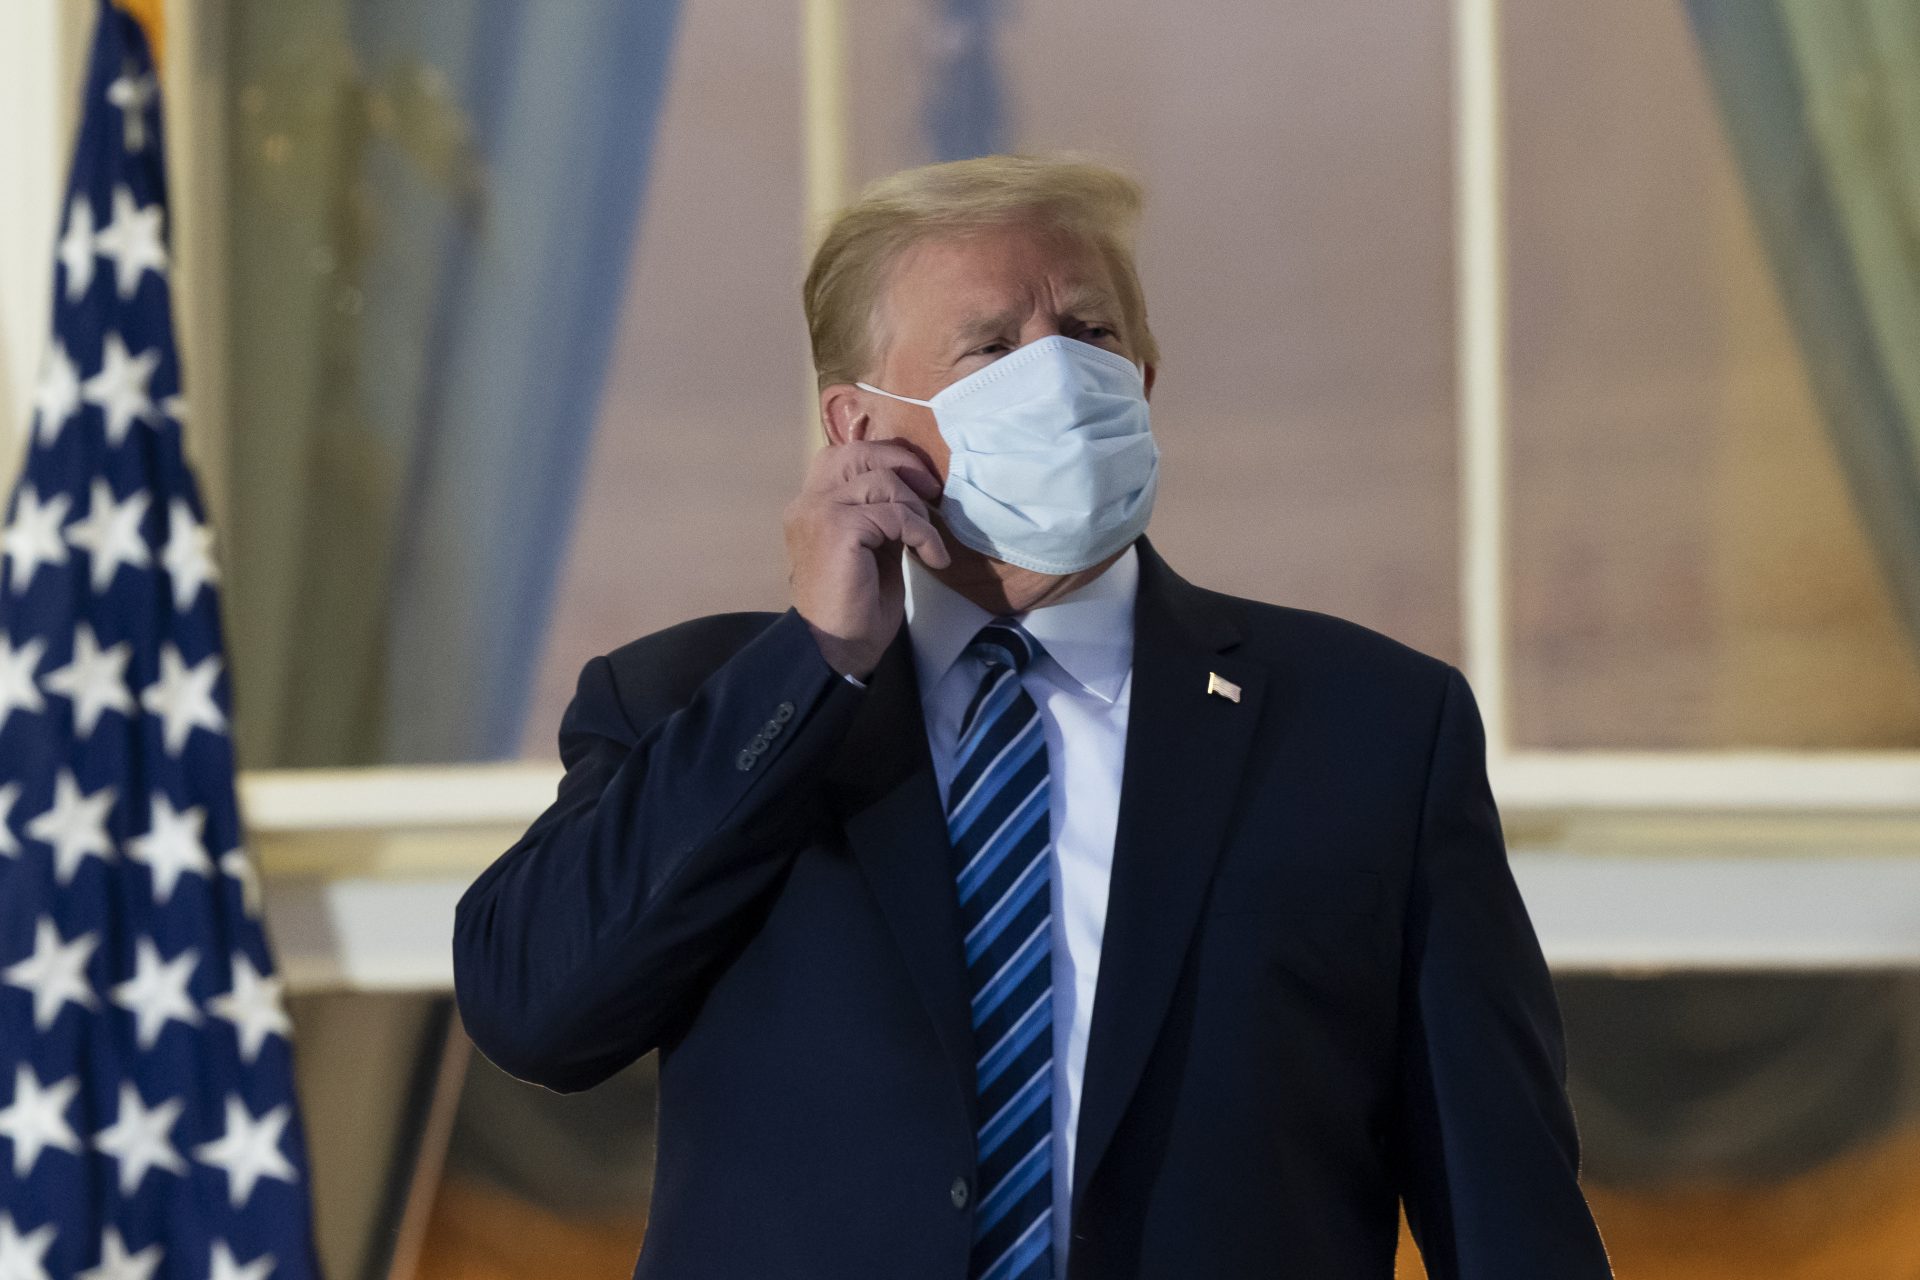 President Donald Trump removes his mask as he stands on the Blue Room Balcony upon returning to the White House Monday, Oct. 5, 2020, in Washington, after leaving Walter Reed National Military Medical Center, in Bethesda, Md. Trump announced he tested positive for COVID-19 on Oct. 2.